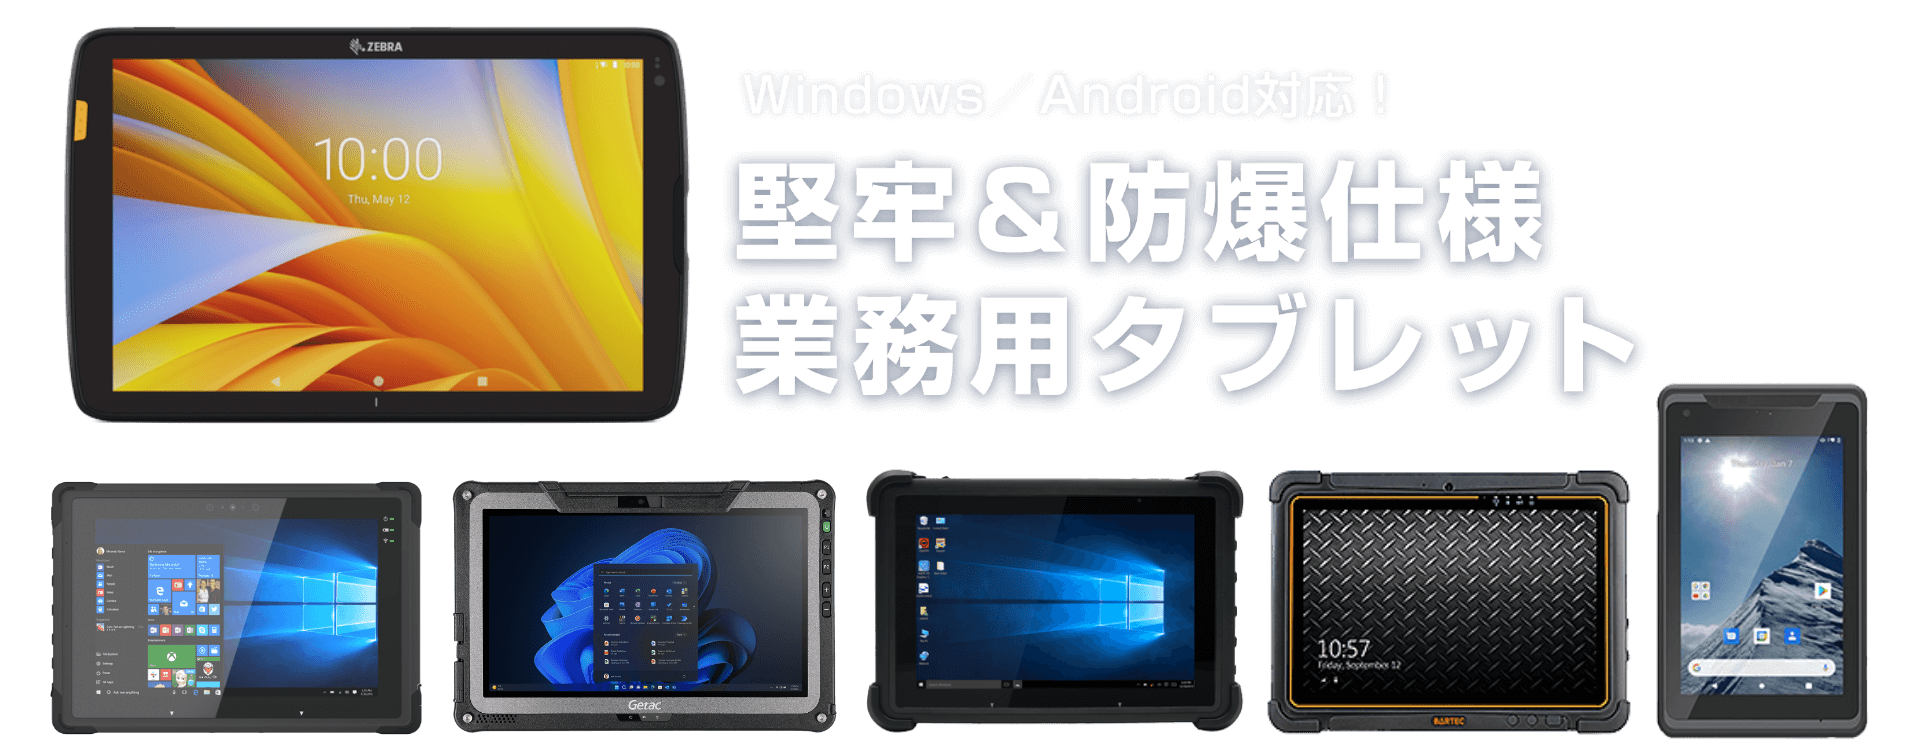 Windows/Android対応！堅牢＆防爆仕様業務用タブレット